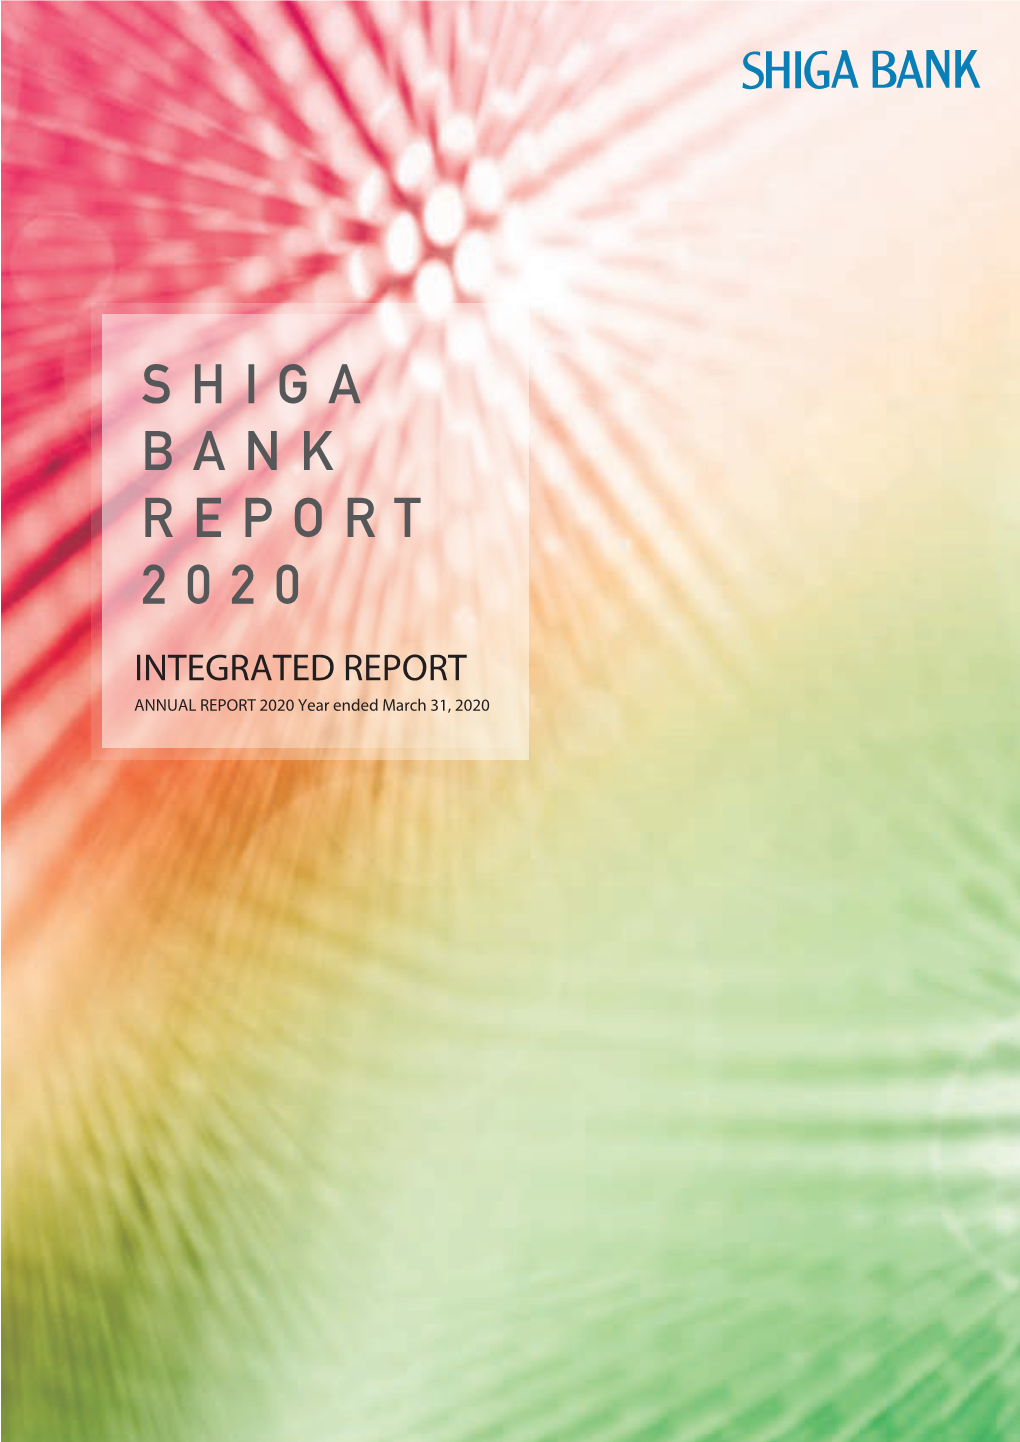 INTEGRATED REPORT ANNUAL REPORT 2020 Year Ended March 31, 2020